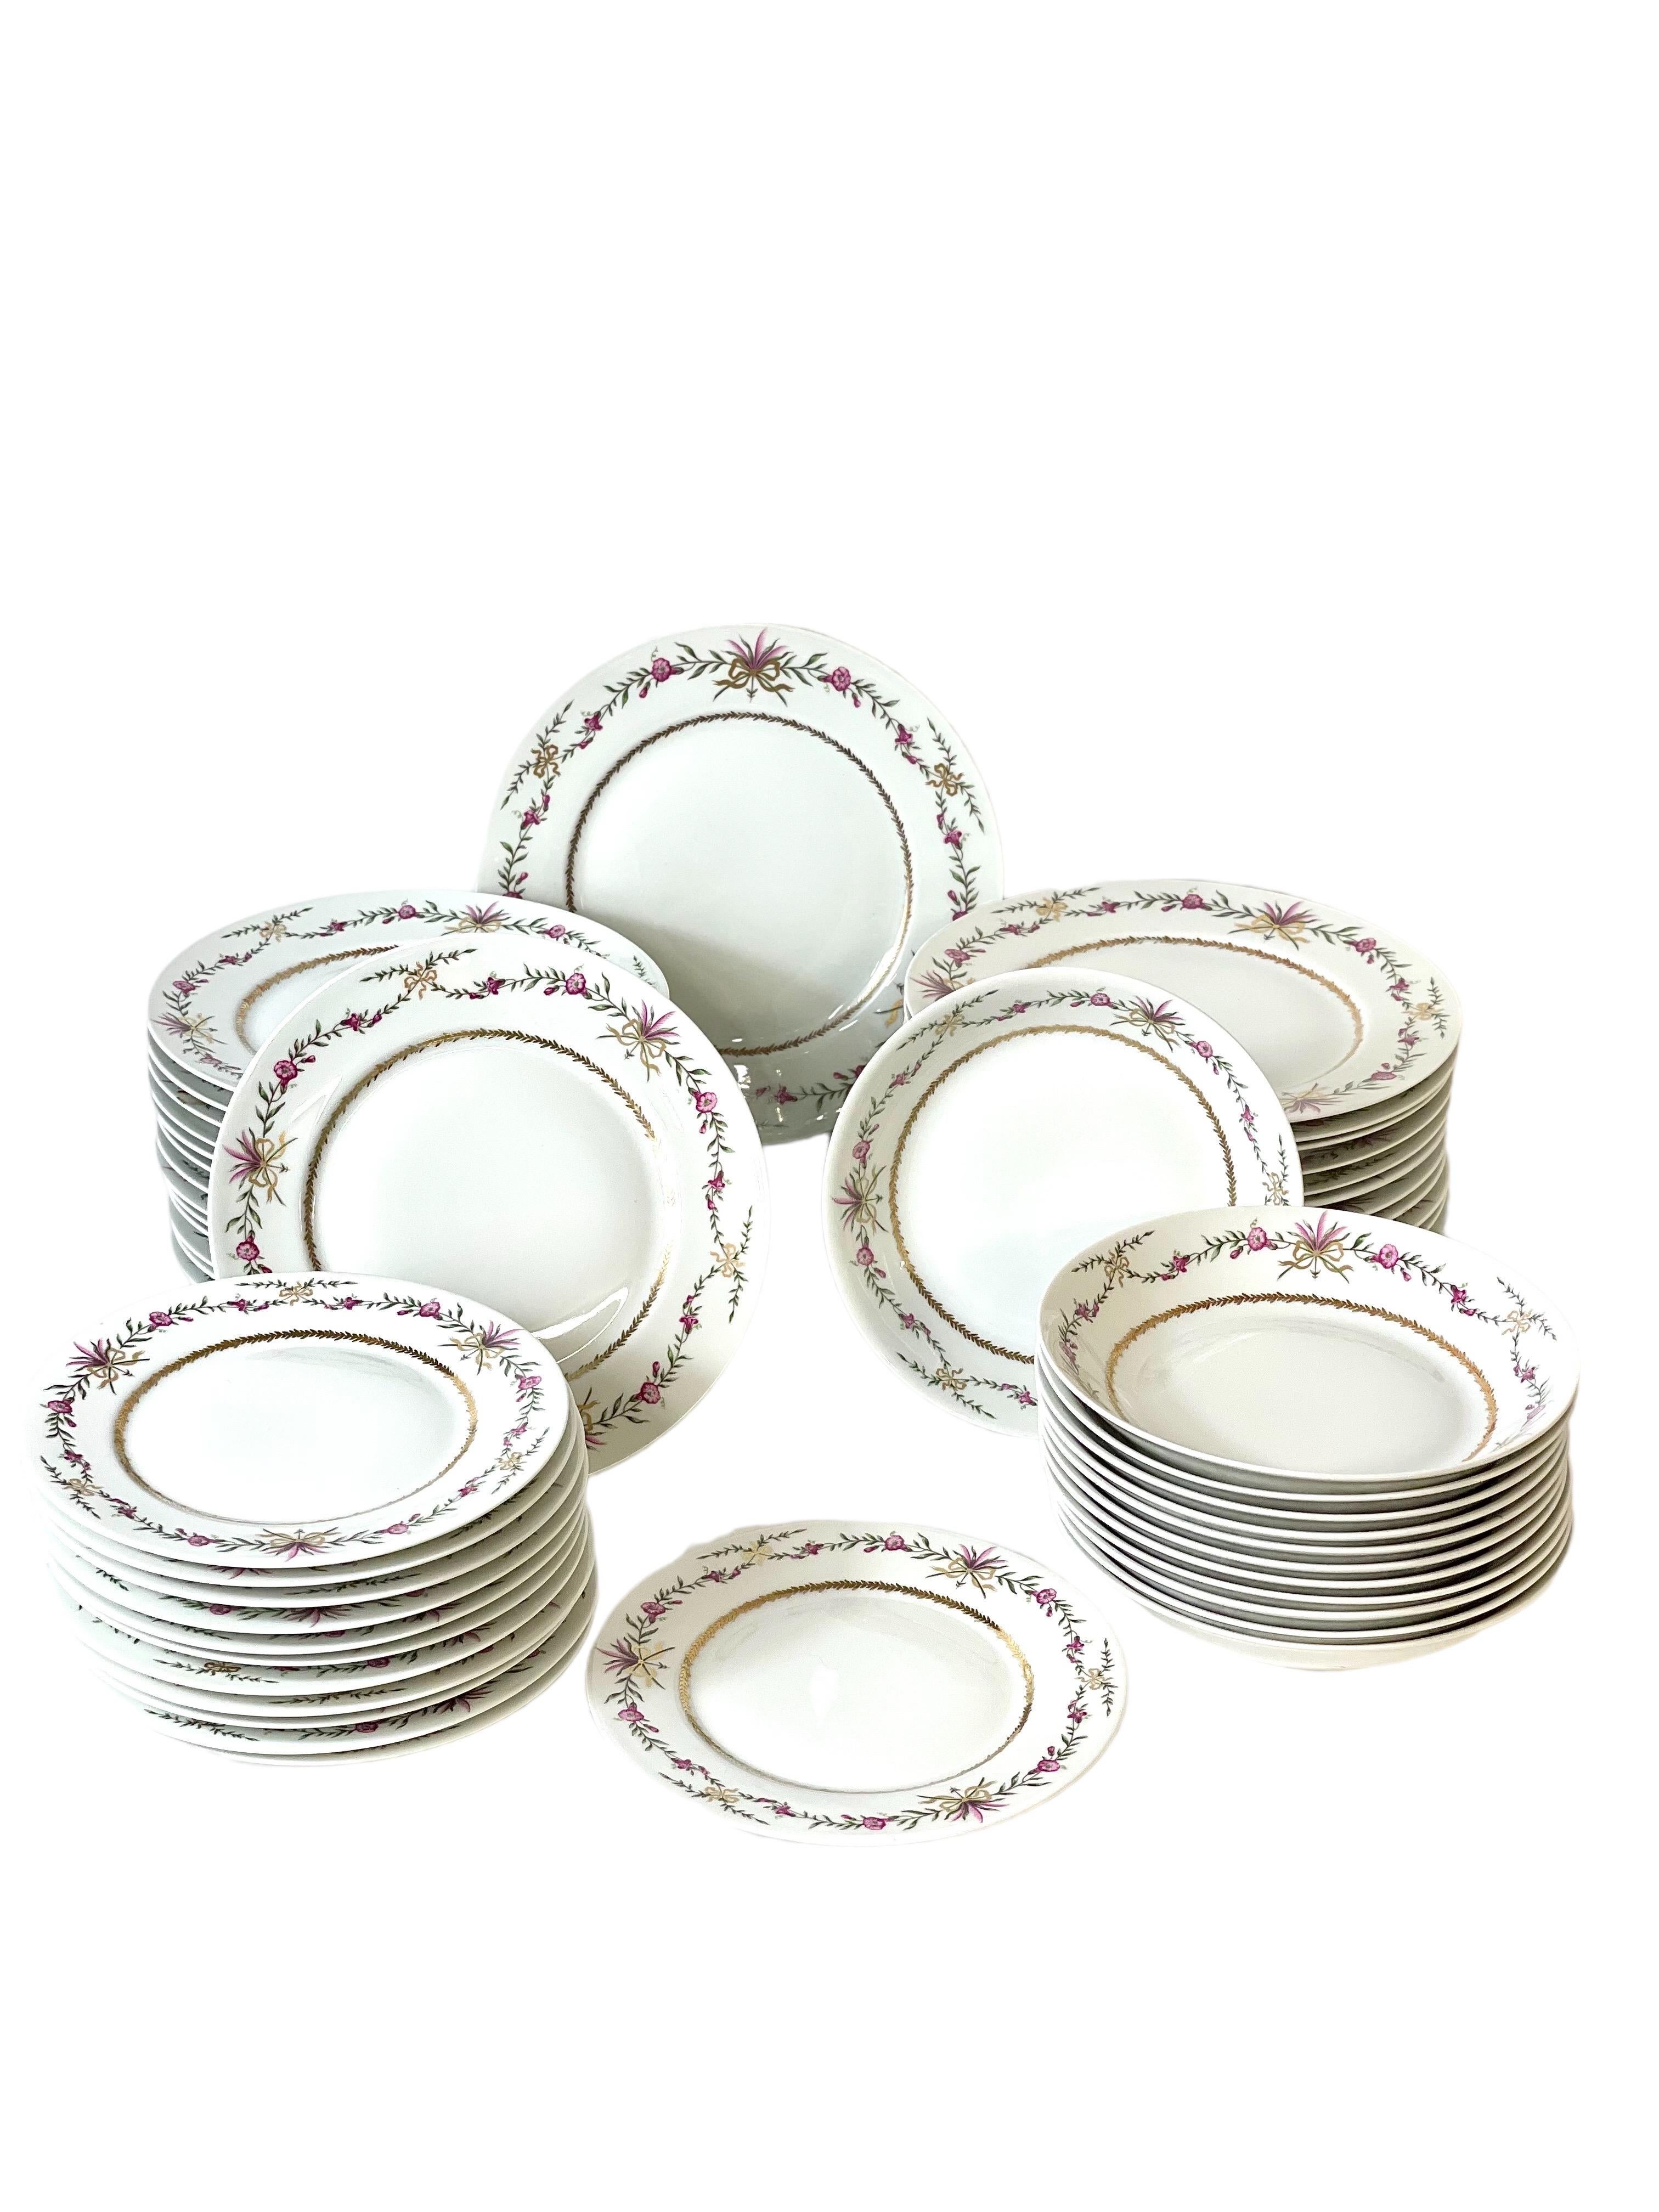 A lovely dinner service of 65 pieces, in delicate Limoges porcelain and stamped with the maker's mark of 'Raynaud'. Sumptuously decorated with hand painted garlands of pink bell- shaped flowers and delicate green foliage spilling from delicate